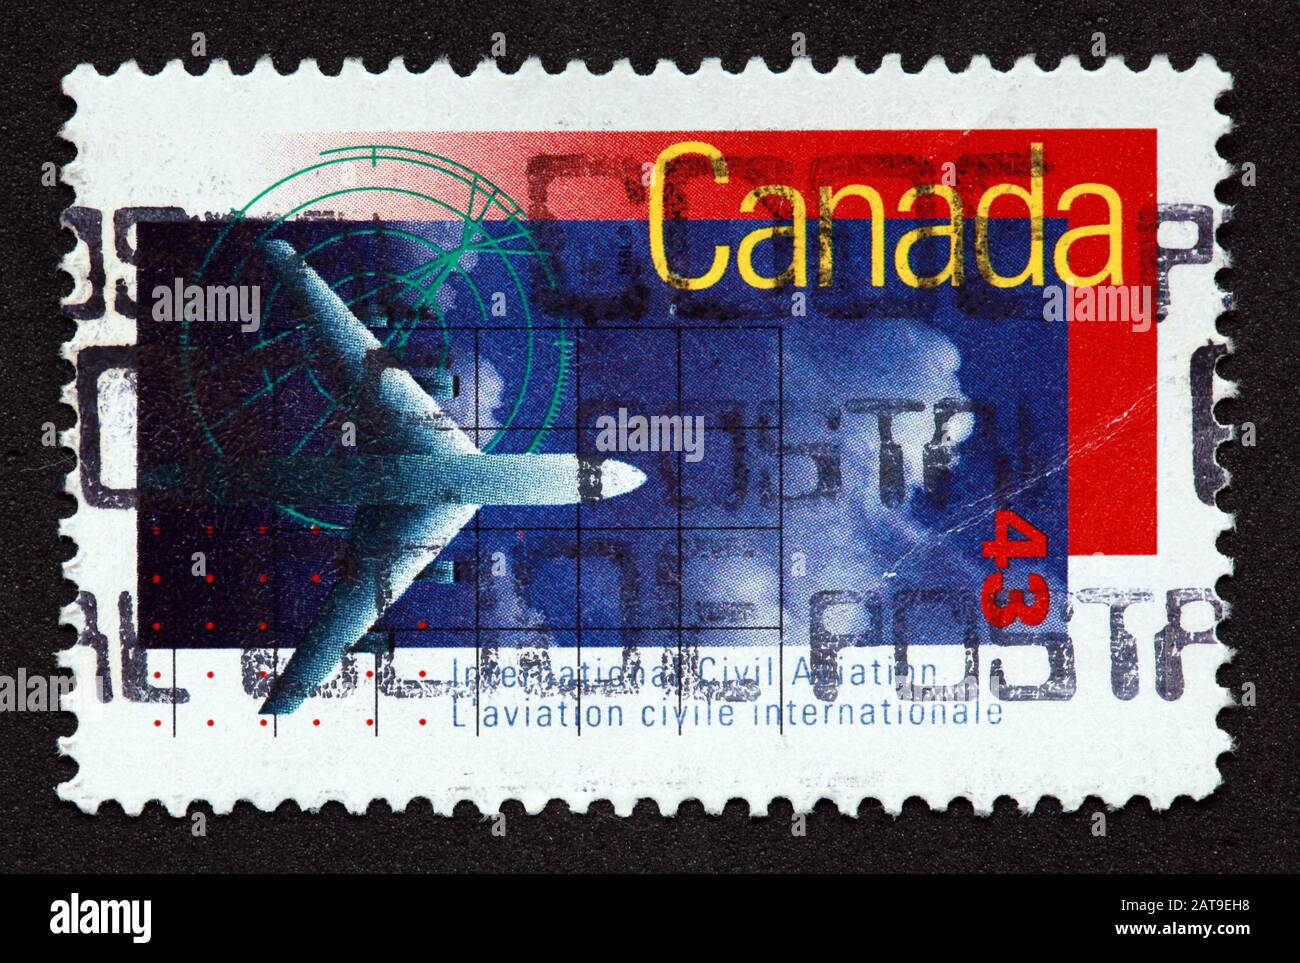 Canadian Stamp, Canada Stamp, Canada Post,used stamp, Canada 43 Civil Aviation international plane,airplane postmarked Stock Photo